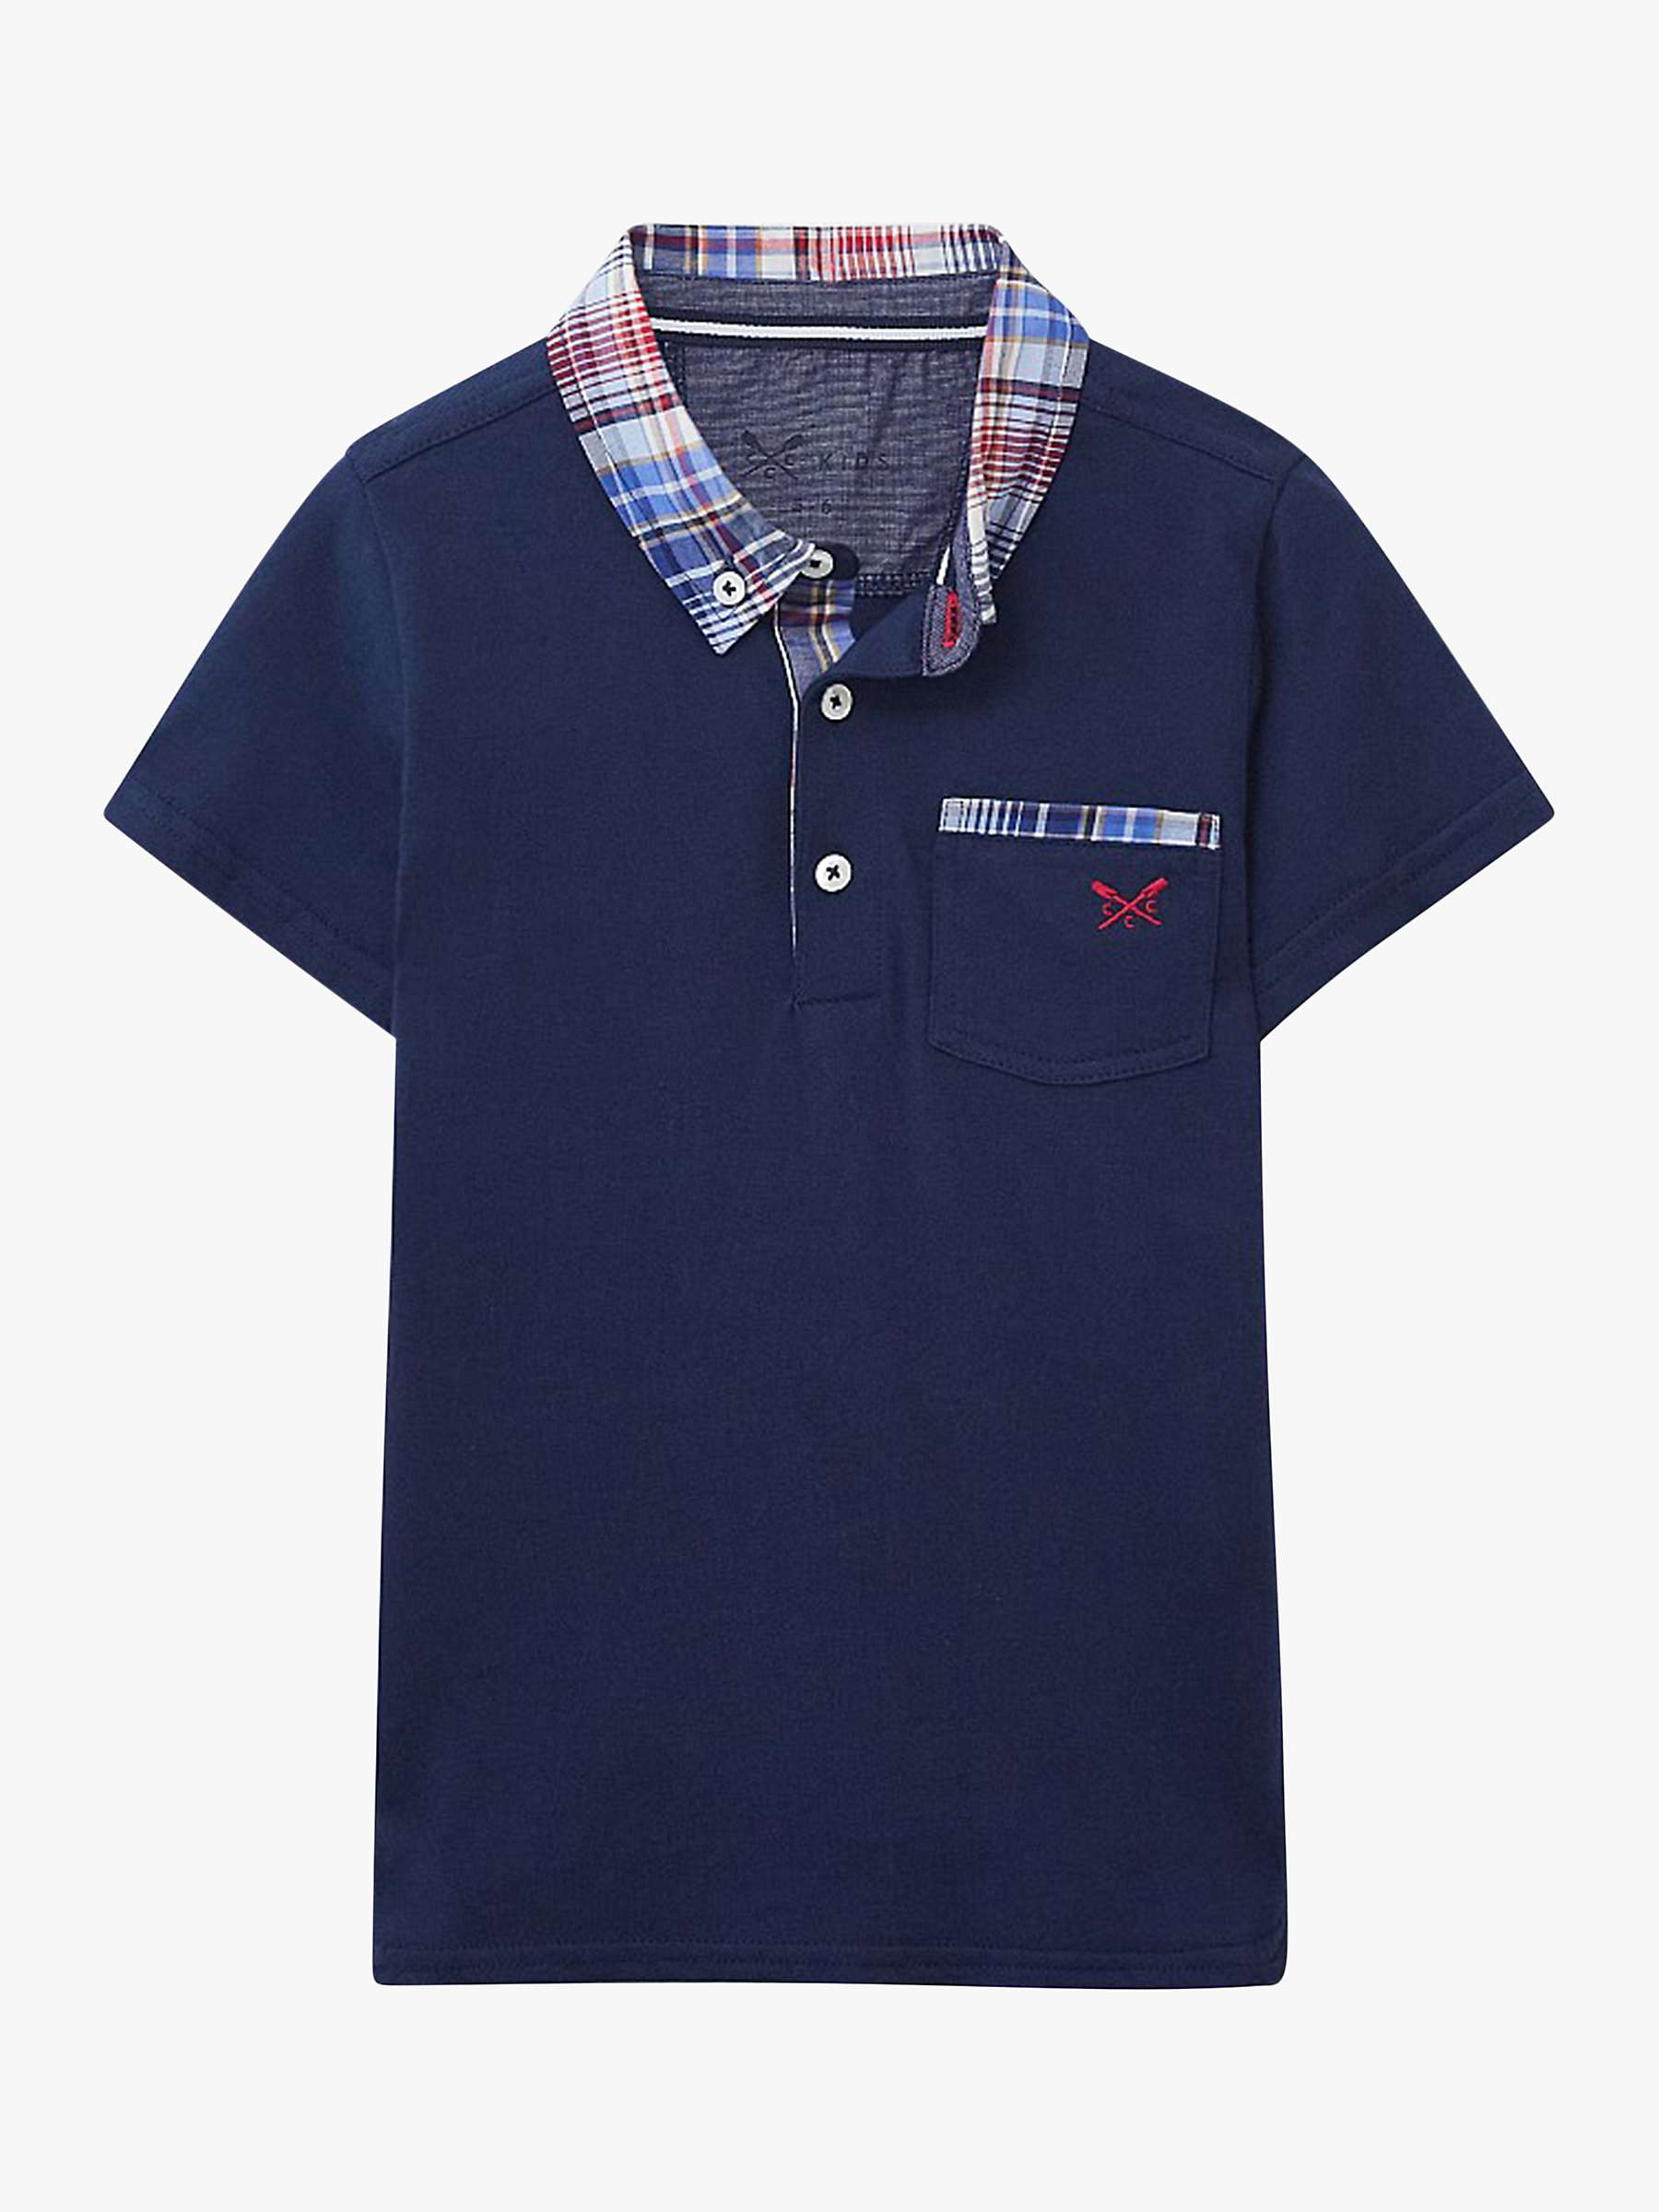 Buy Crew Clothing Kids' Woven Check Collar Polo Shirt, Aubergine Online at johnlewis.com